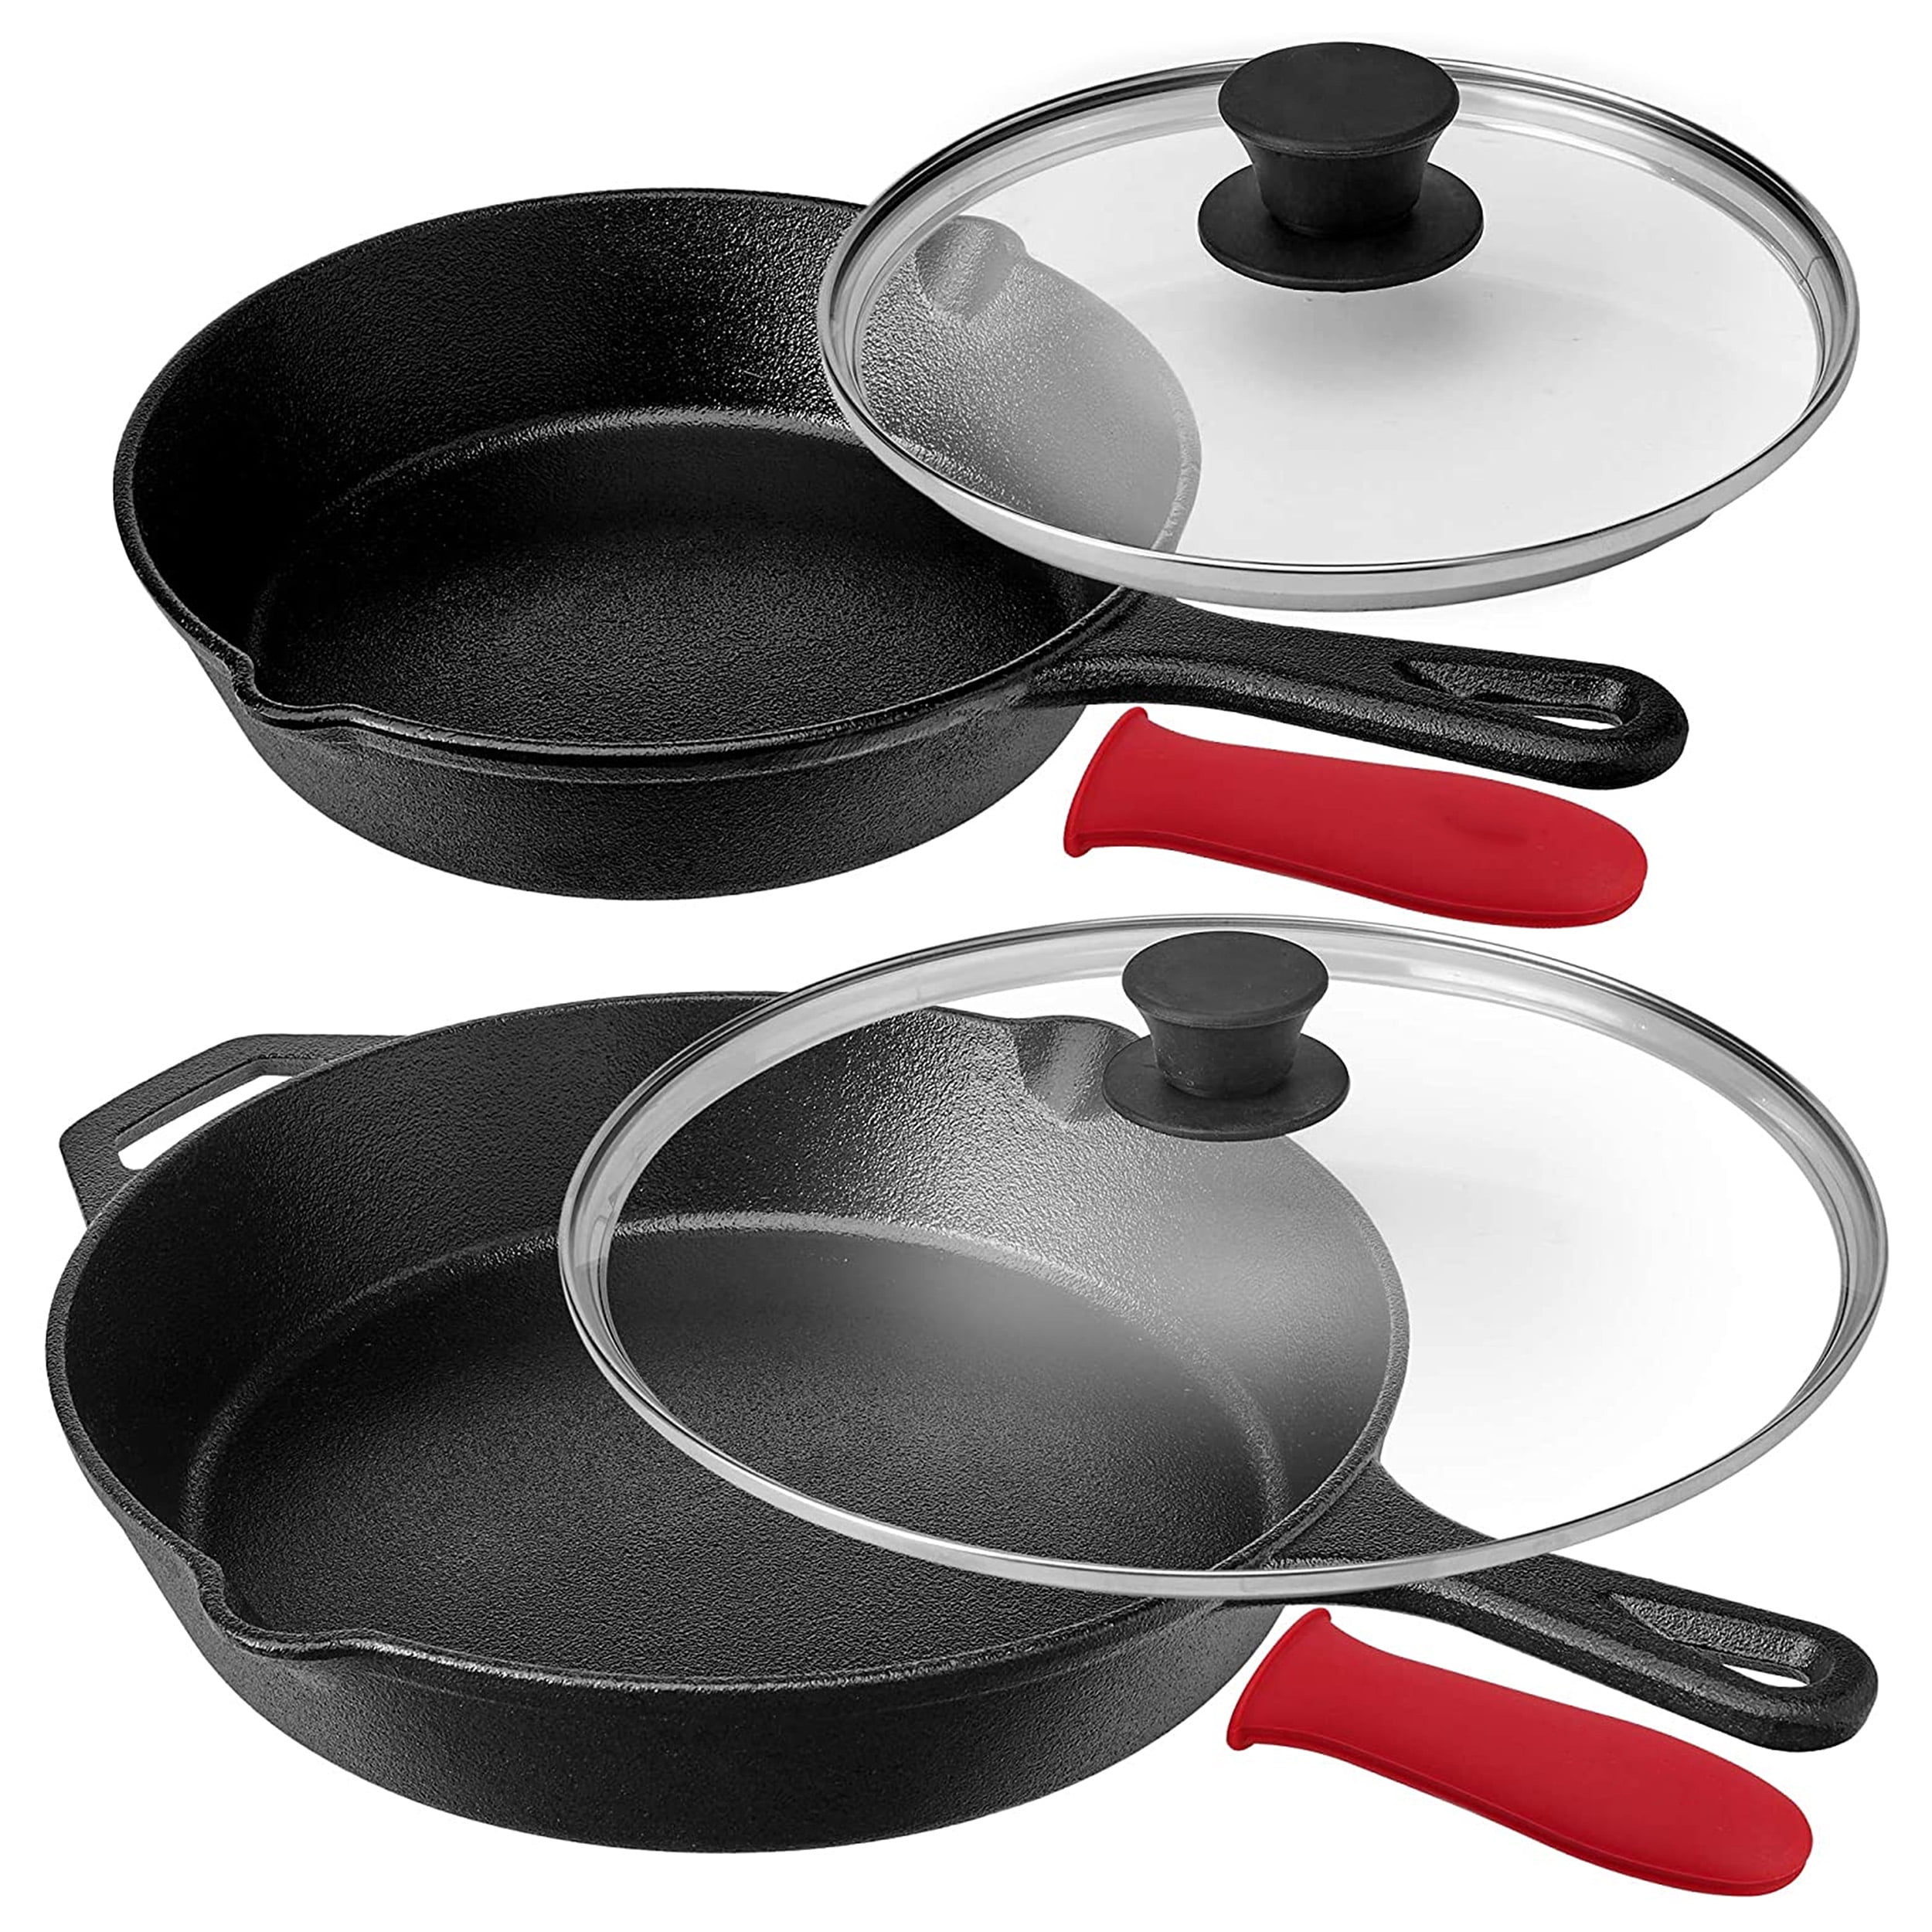 Renewed Stovetop Heat-Resistant Holders Induction Safe Indoor and Outdoor Use Oven Safe Cookware Pre-Seasoned Cast Iron Skillet Set Grill 8-Inch and 12-Inch 